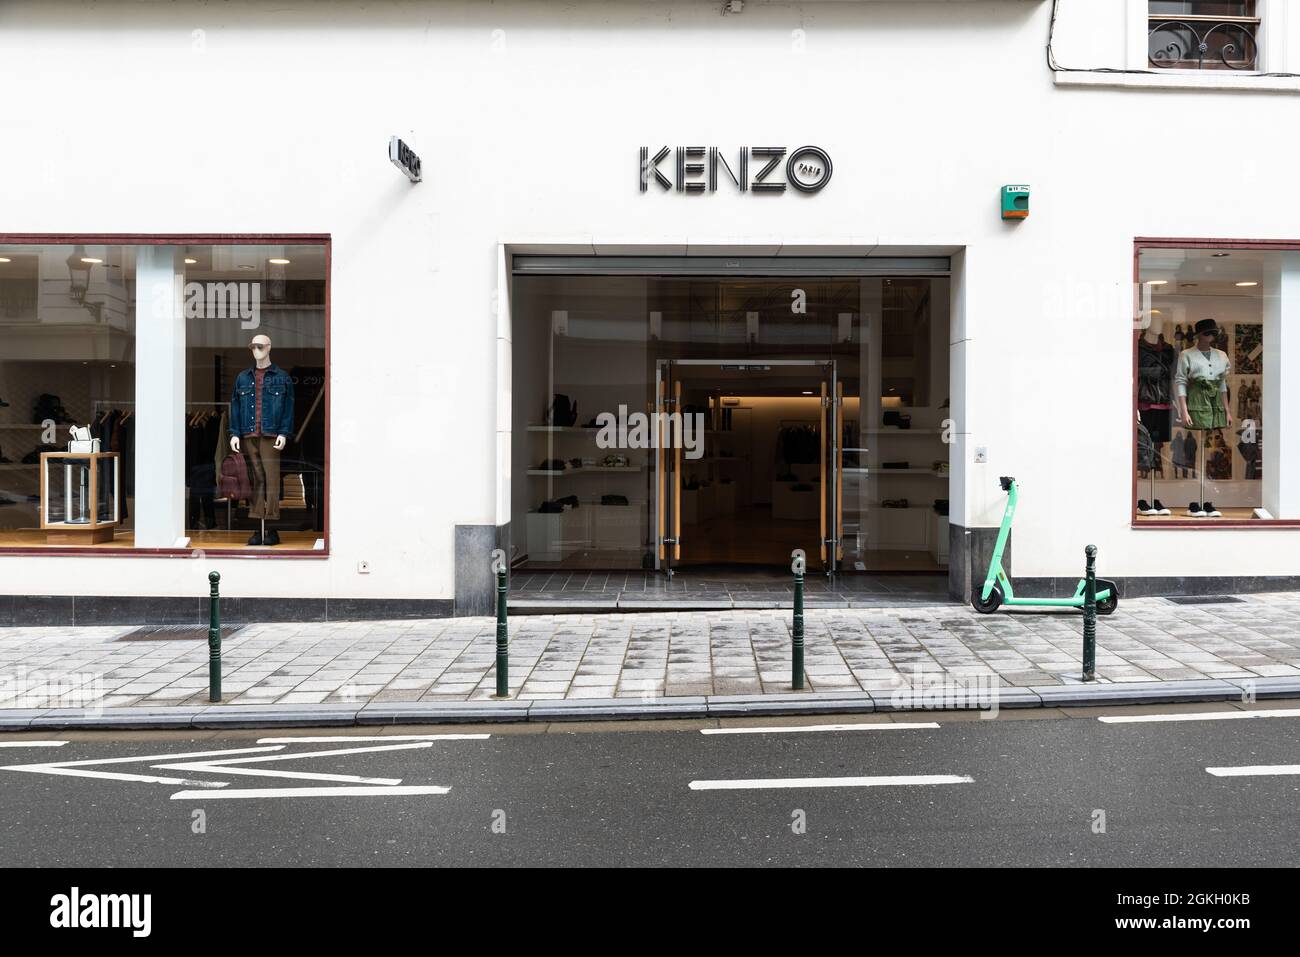 Brussels Old Town, Brussels Capital Region - Belgium - 09 10 2021: Facade of the Kenzo fashion store Stock Photo